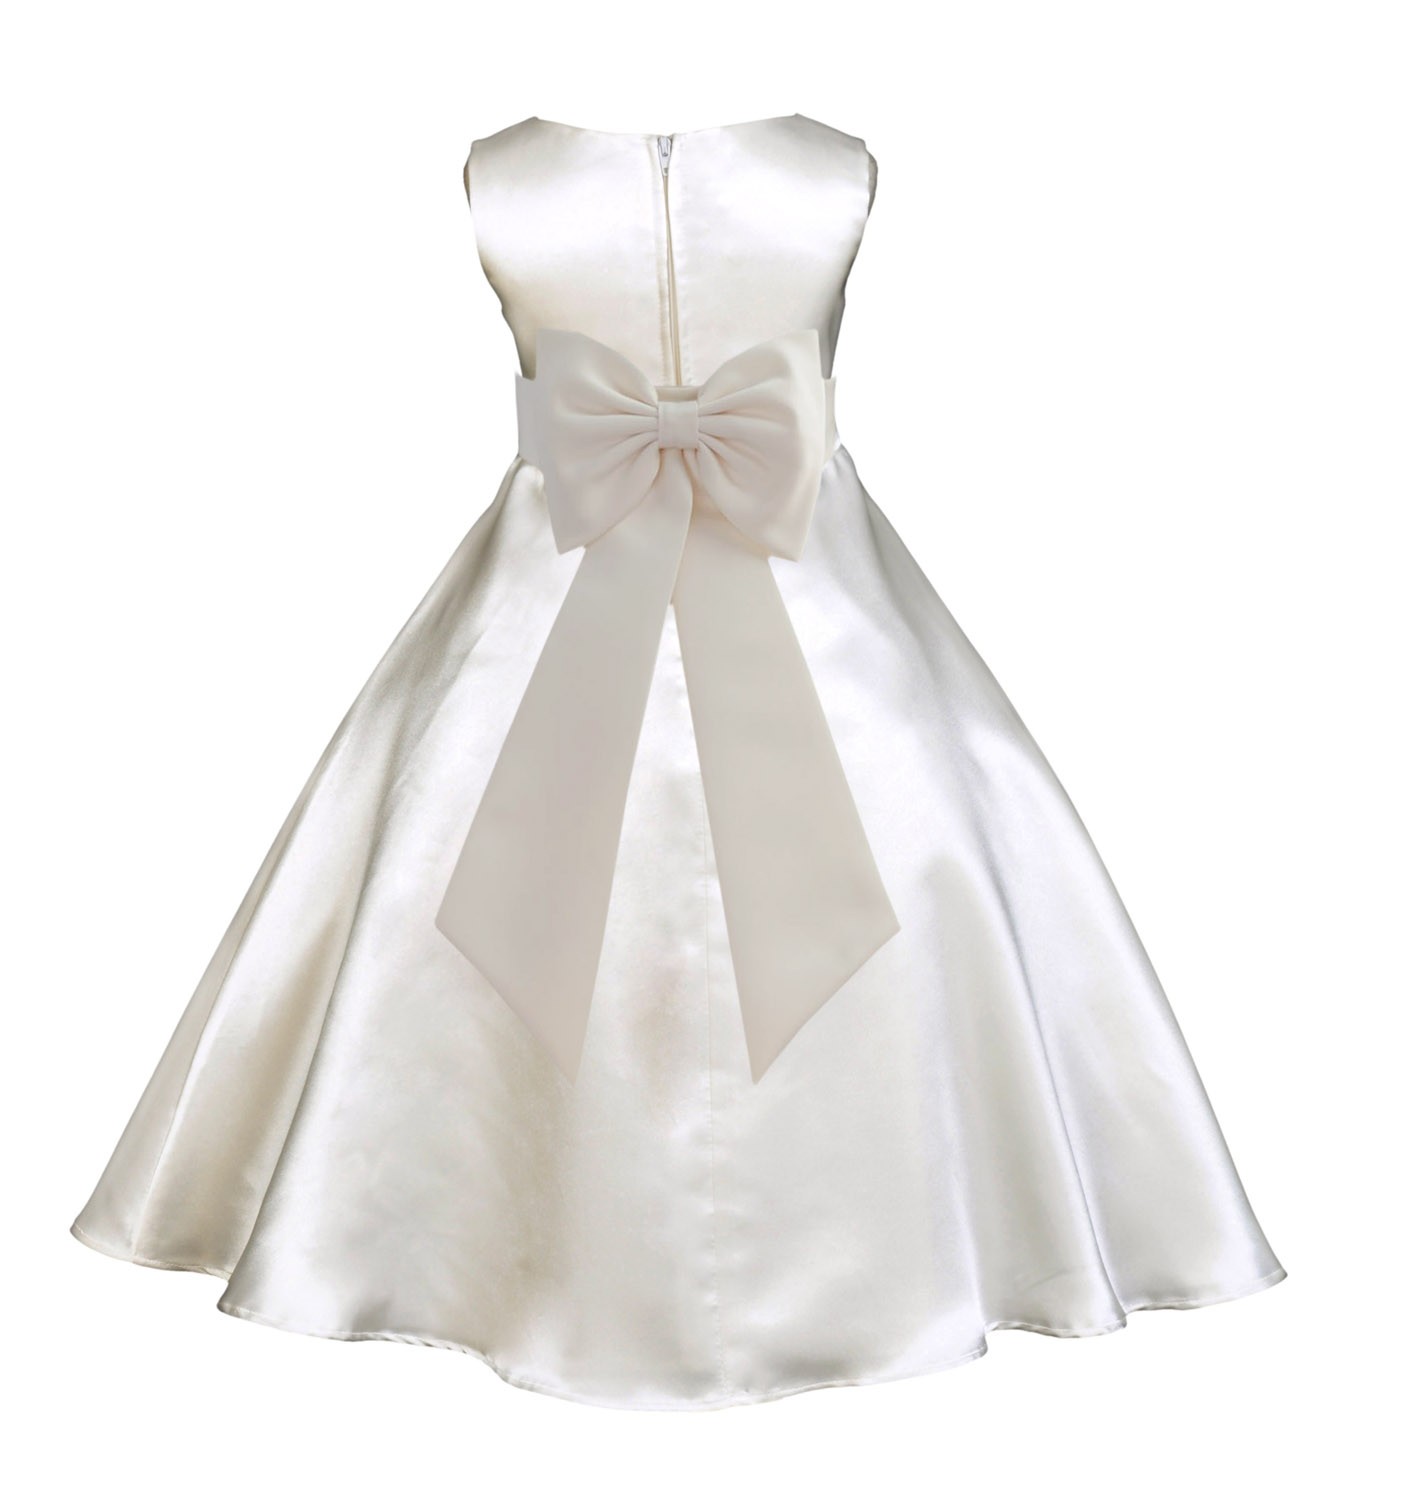 Ivory/Ivory A-Line Satin Flower Girl Dress Pageant Reception 821T